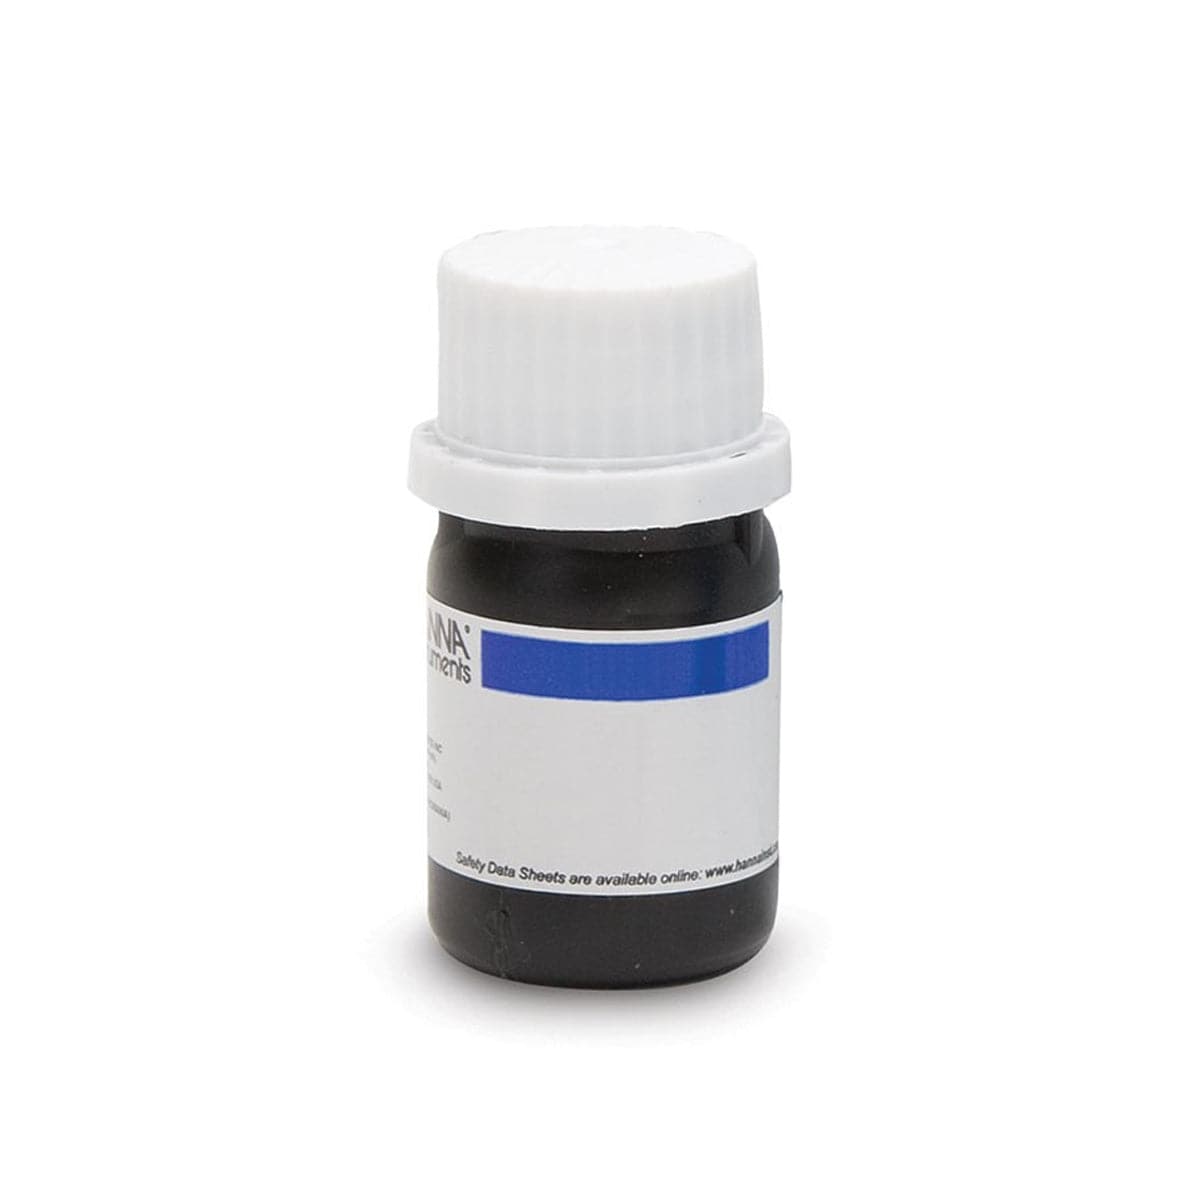 A bottle of Alkalinity Freshwater Checker® Reagents (set for 25 tests), possibly made by TAS, on a white background.